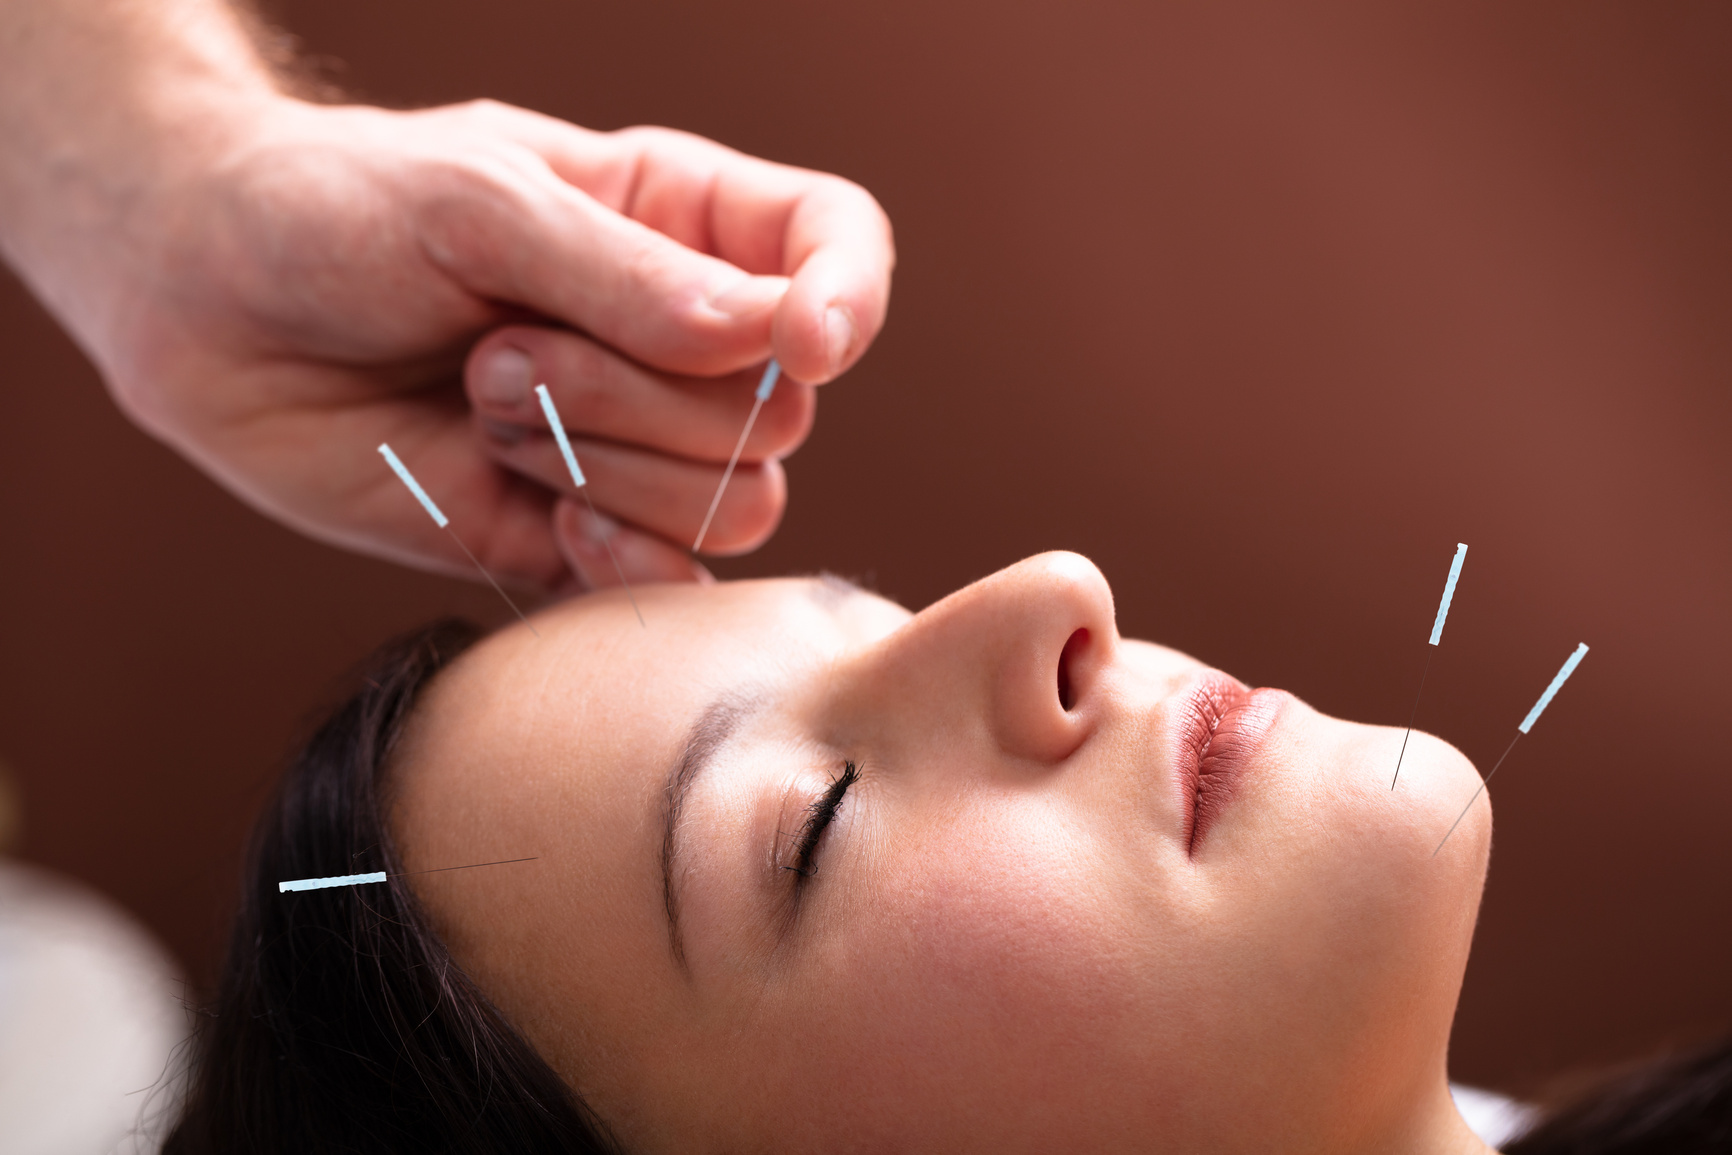 Woman Receiving Acupuncture Treatment On Her Face